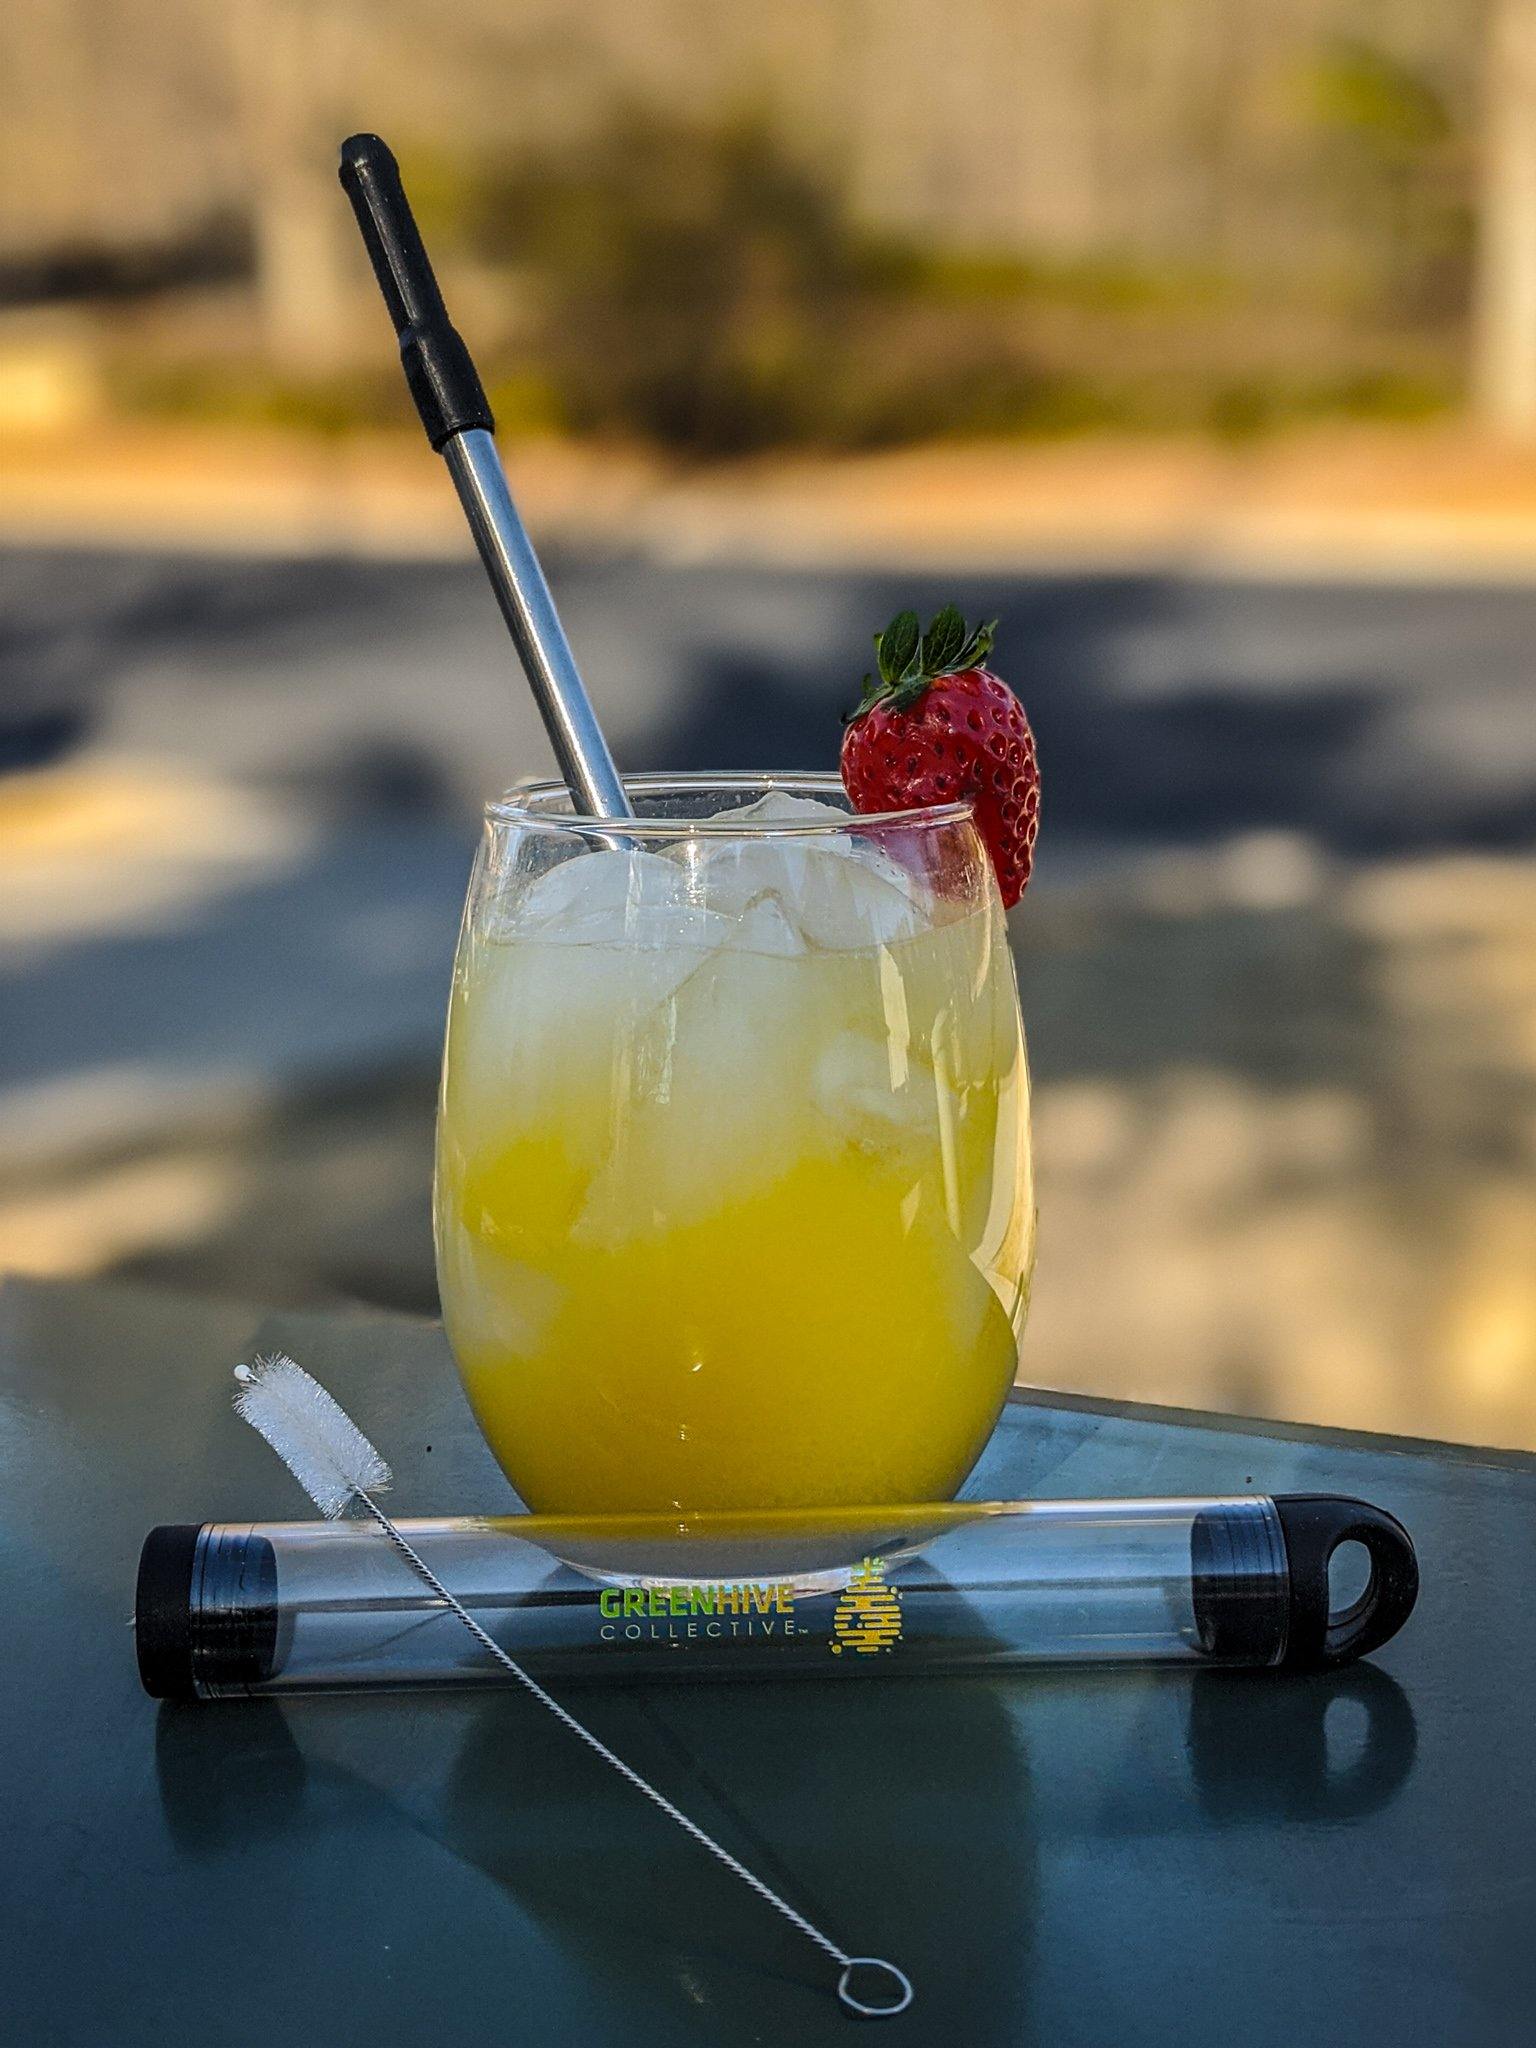 Reusable Stainless Steel Straw - GreenHive Collective - ECO-FRIENDLY APPAREL